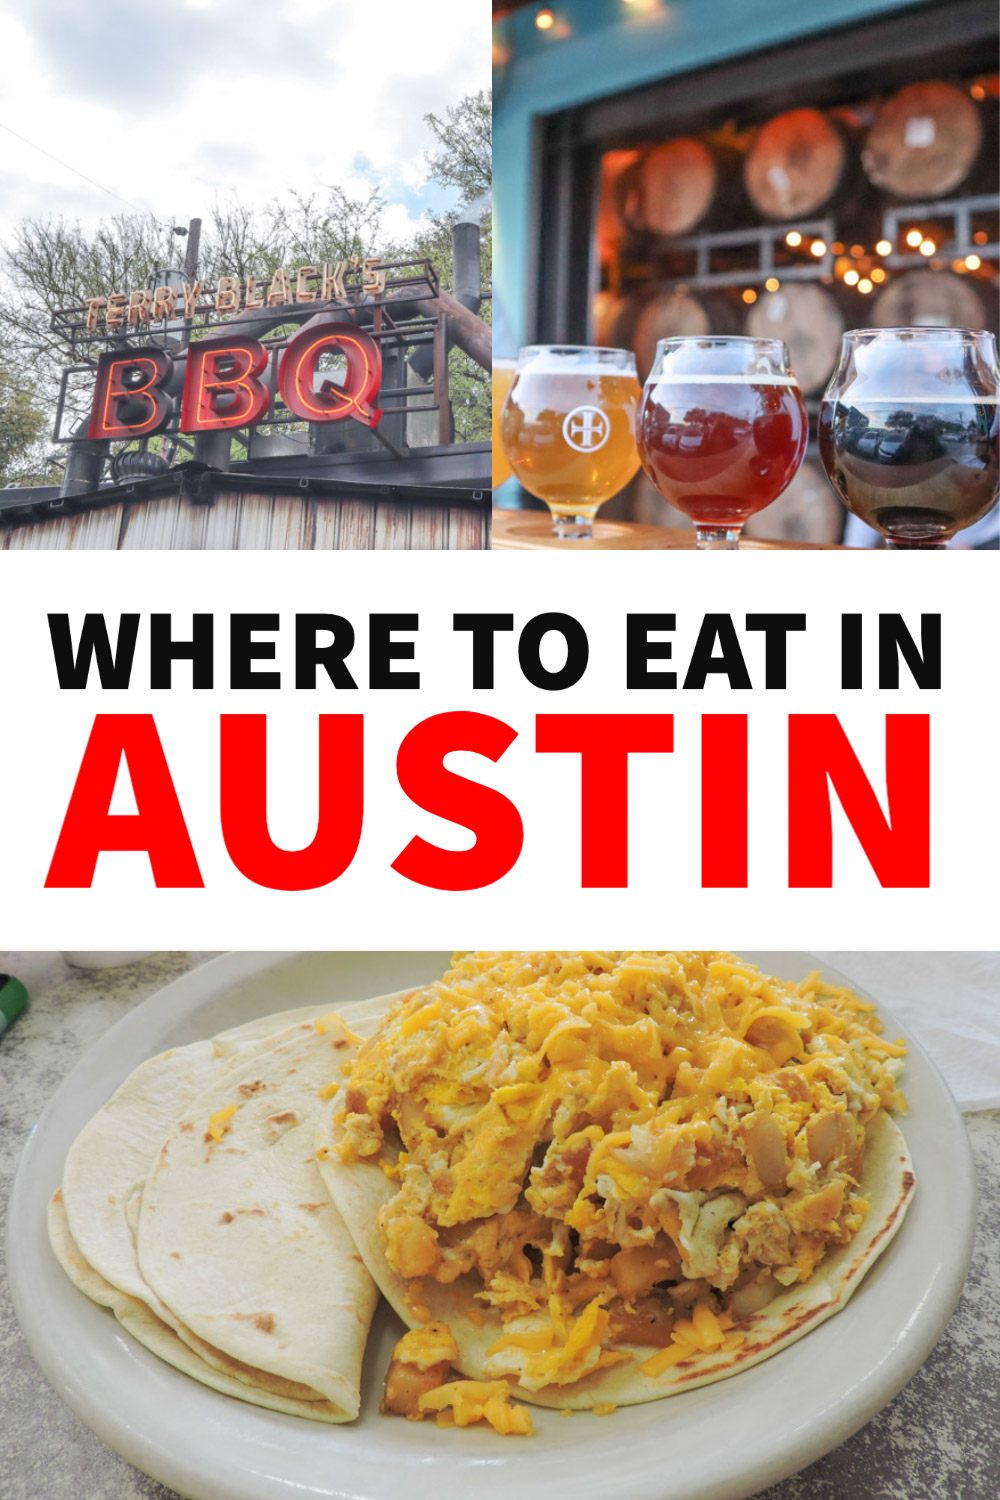 Wondering where to eat in Austin? We share the best BBQ joints, brunch spots, Tex-Mex breakfast diners, nice restaurants and hip food trucks in Austin, Texas. Guide includes a map.